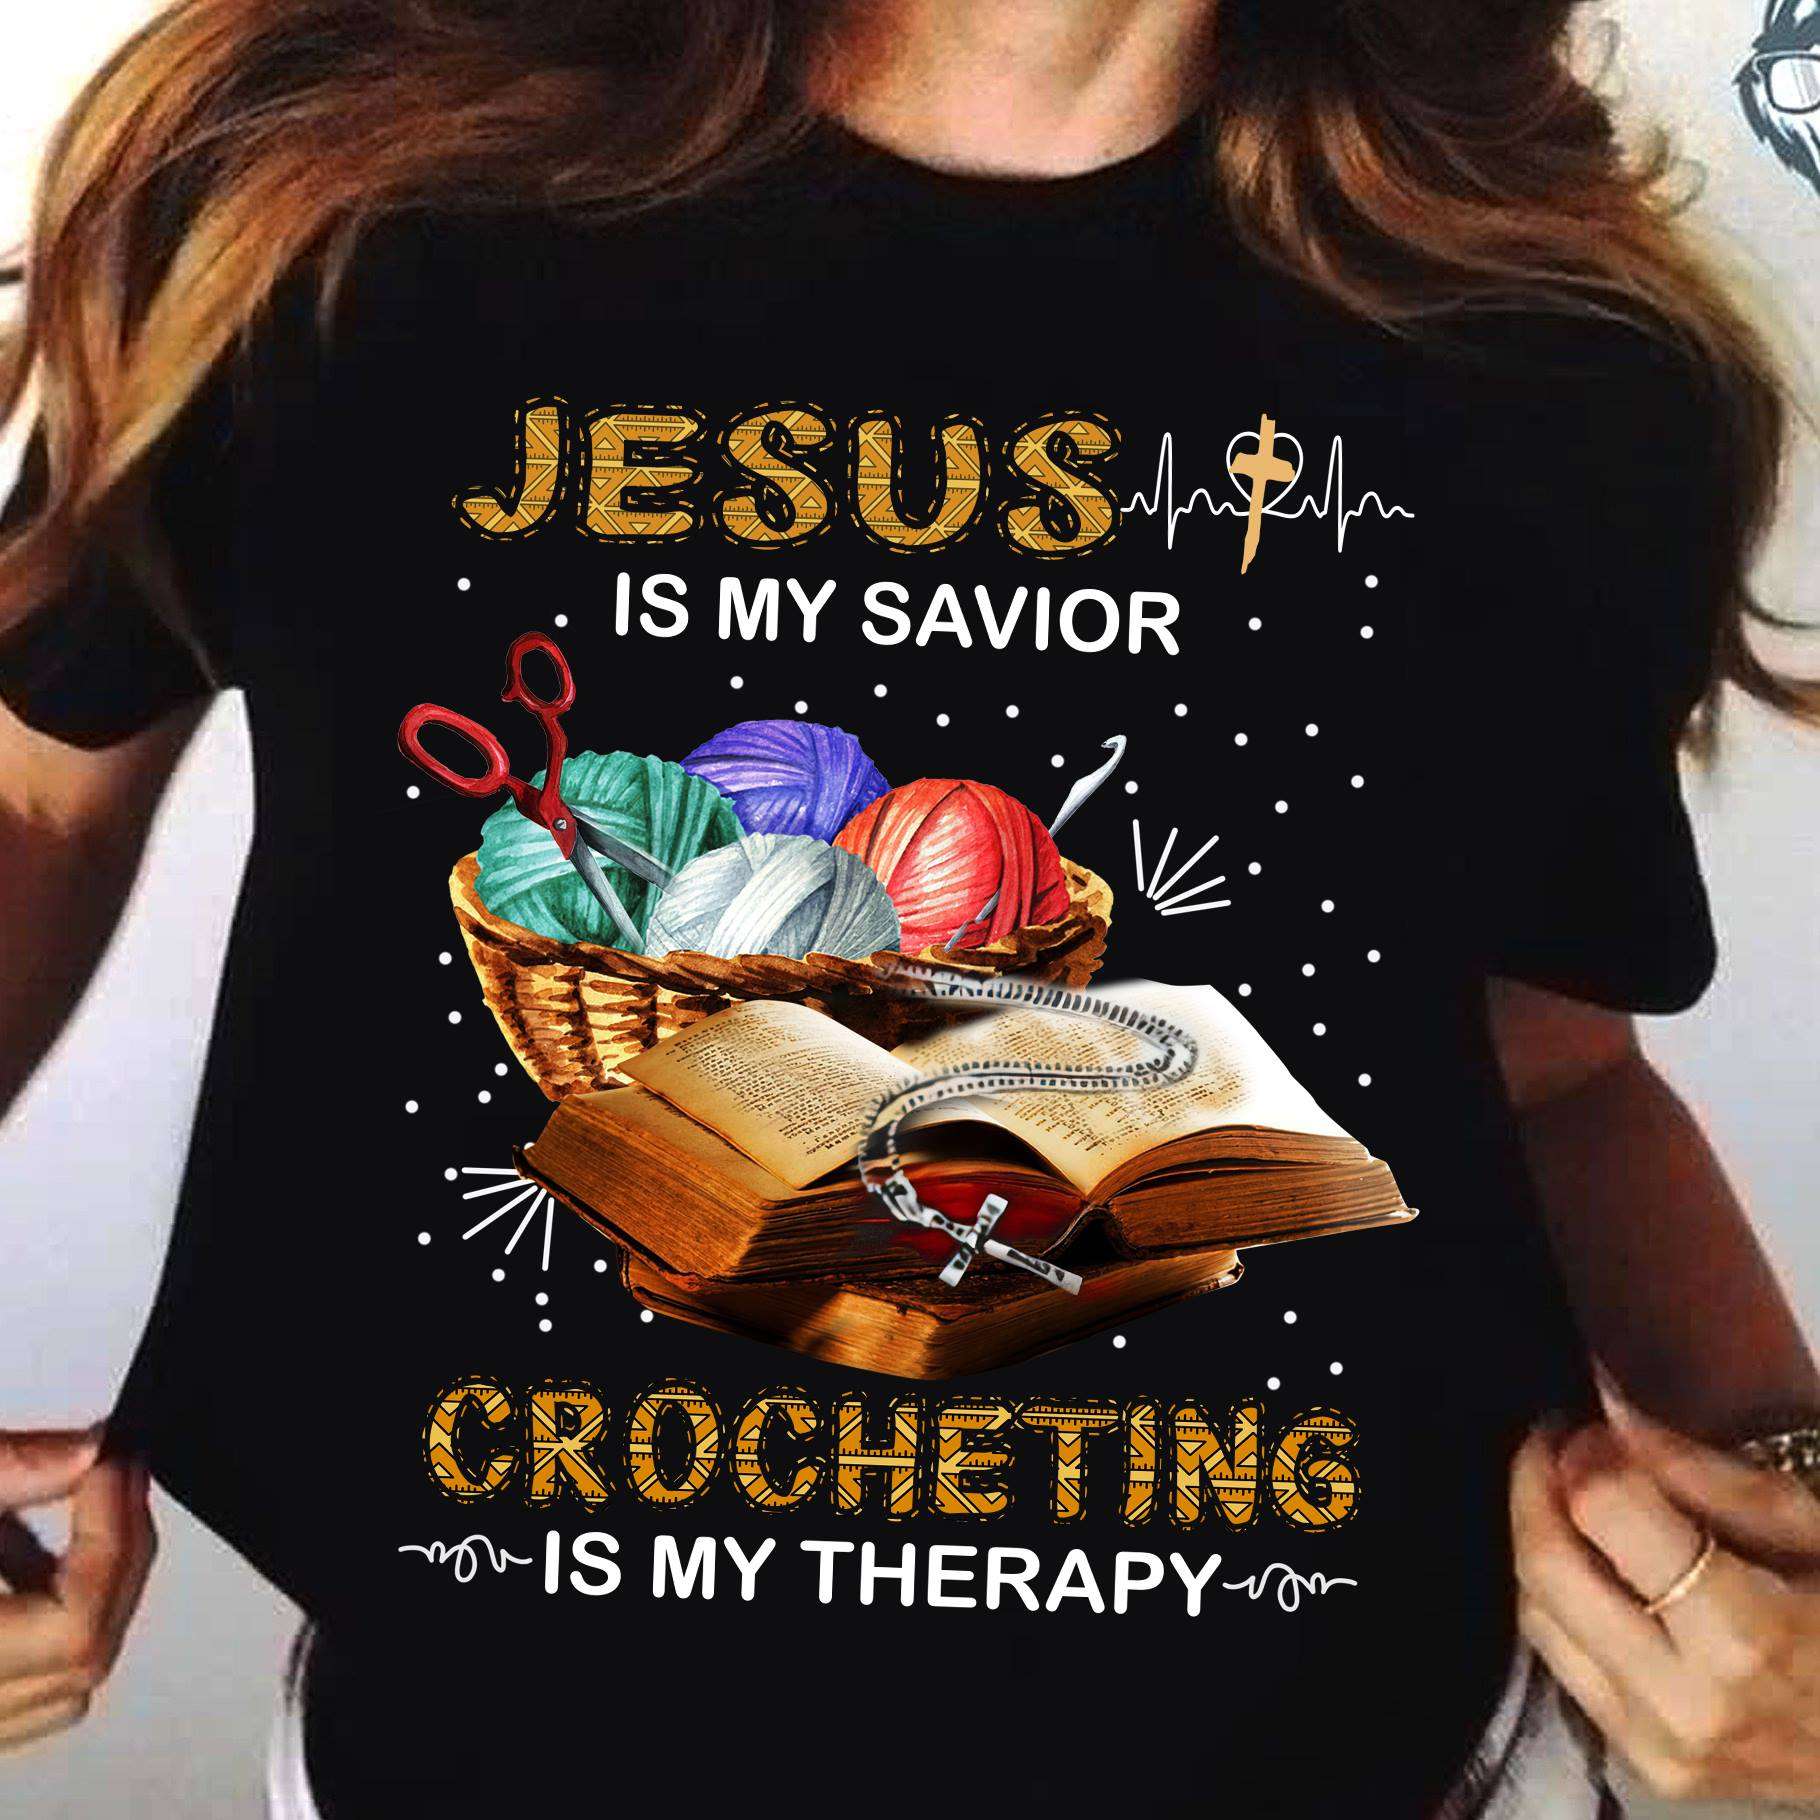 Jesus is my savior, crocheting is my therapy - Jesus and crocheting, crocheting yarn